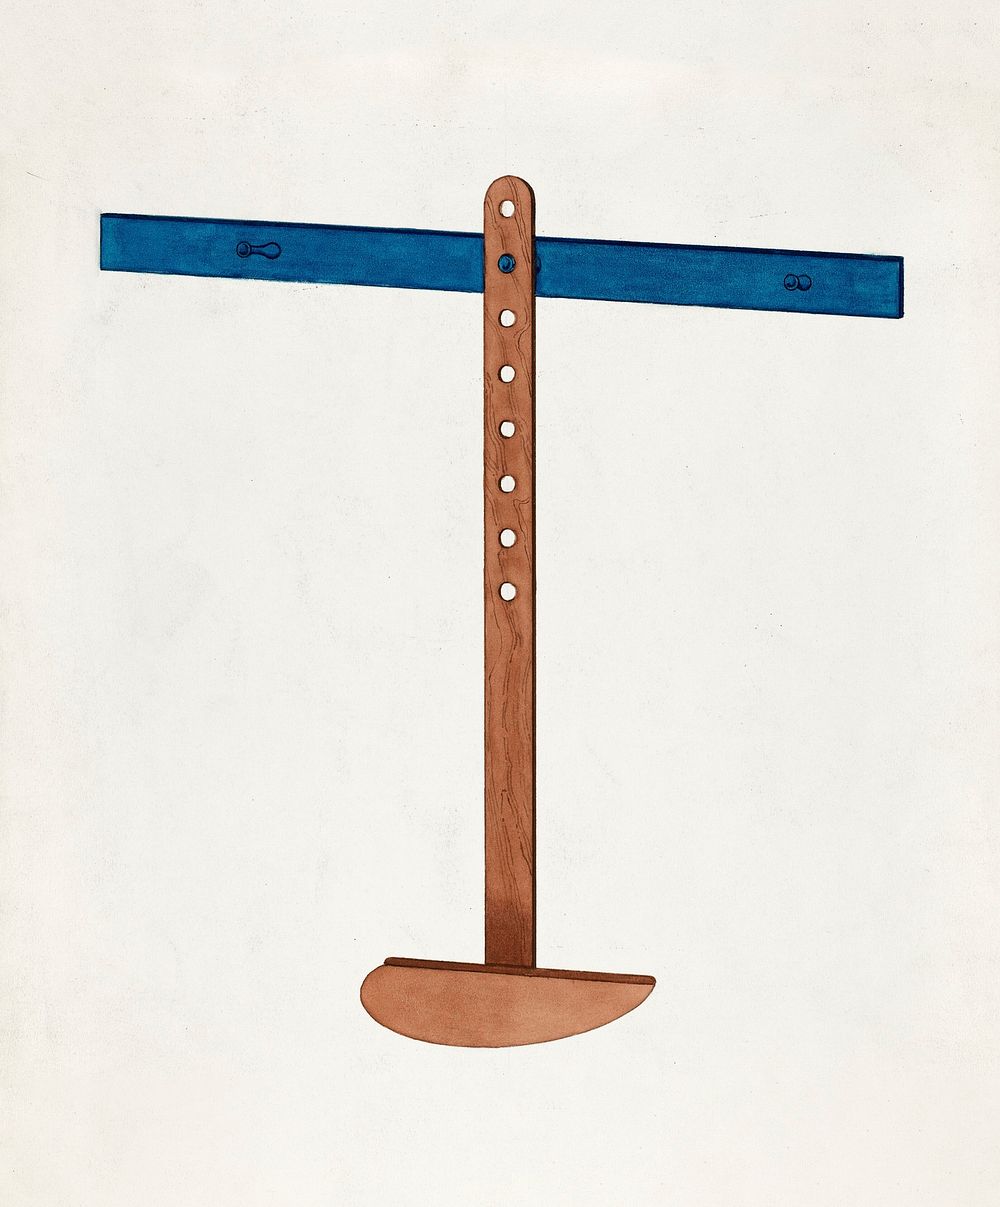 Shaker Lamp Stand (1941). Original from The National Gallery of Art. Digitally enhanced by rawpixel.